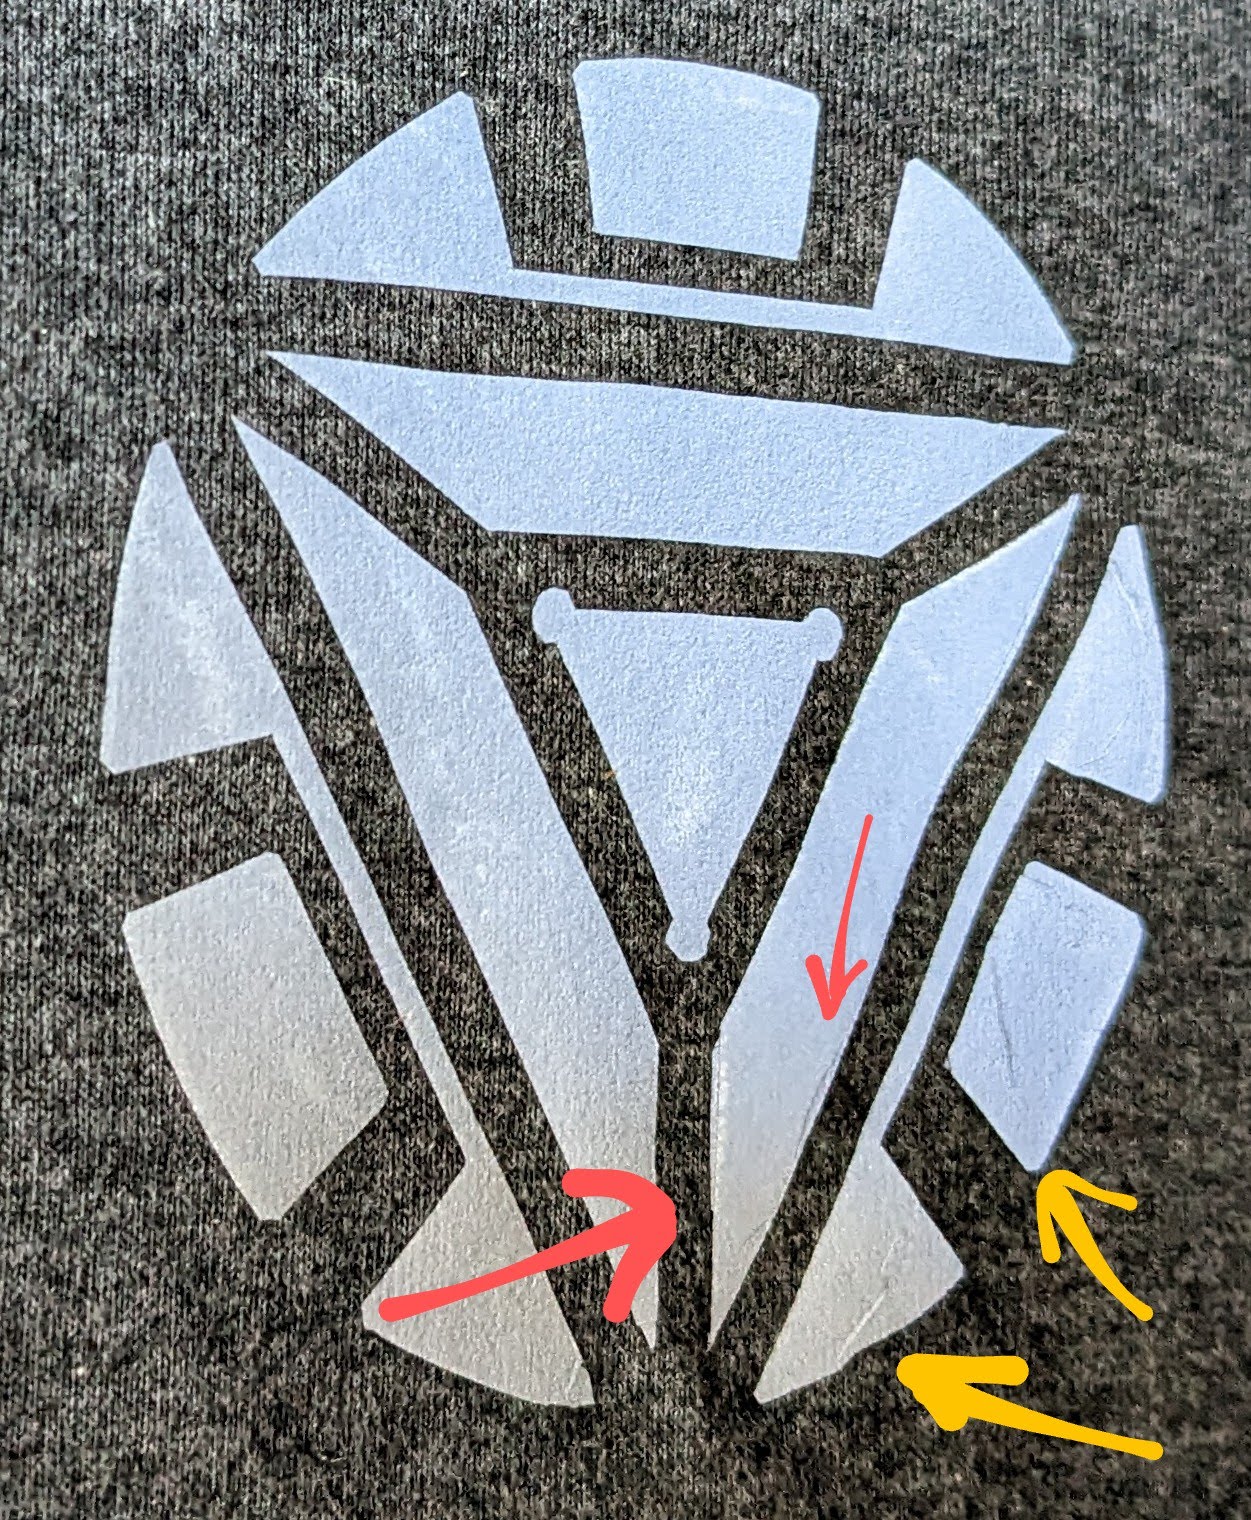 Yellow arrows show where the design pulled up and wrinkled slightly. The red arrows point to where the design tore and was repaired.